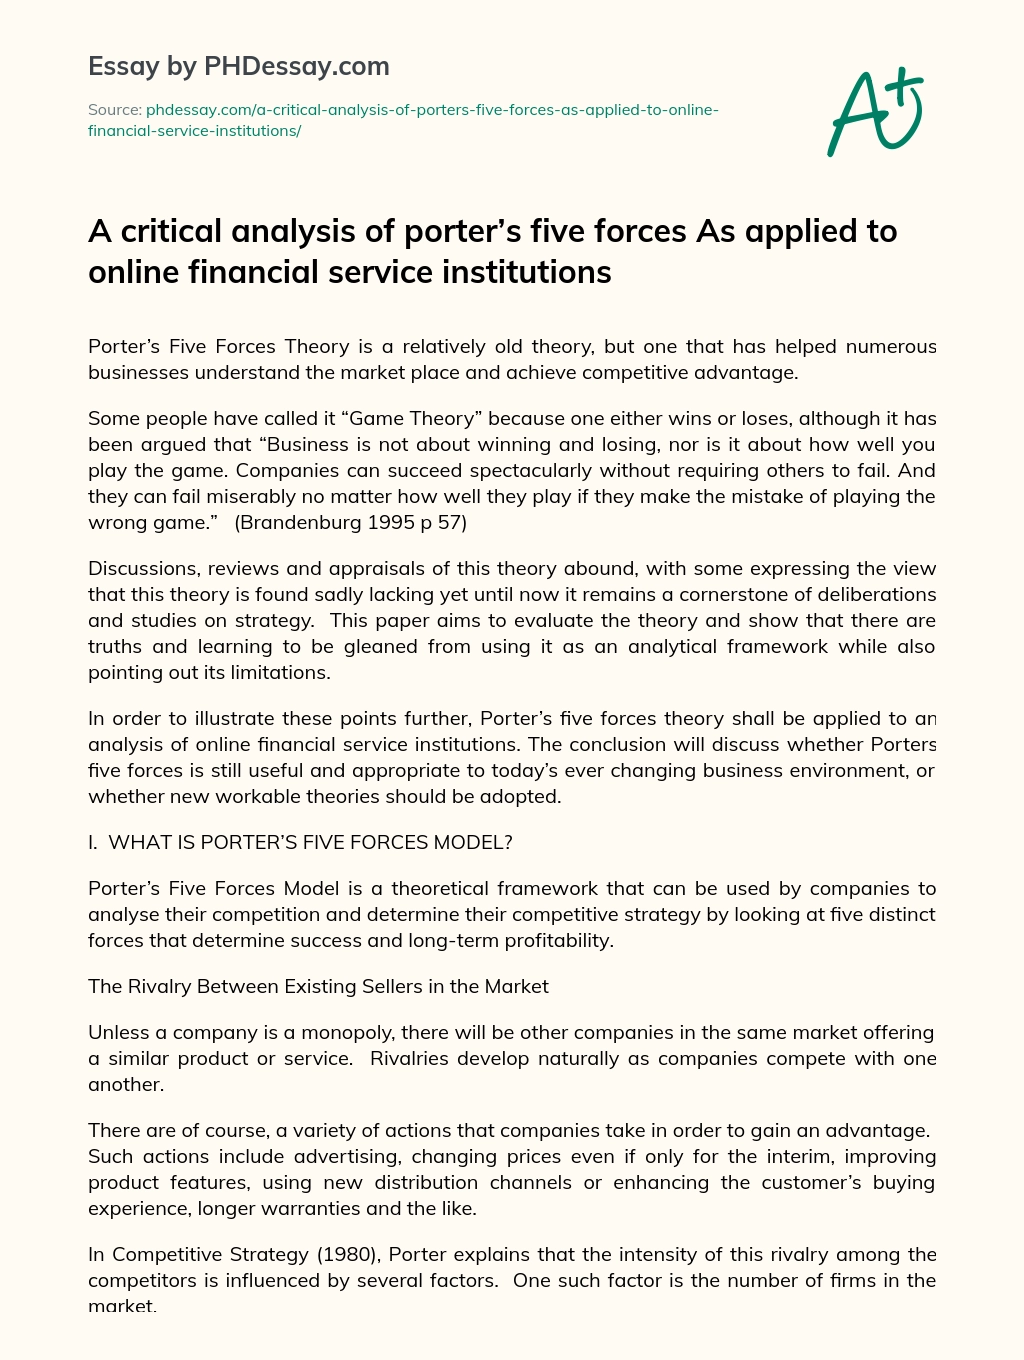 Porter’s Five Forces Theory: A Critical Evaluation and Application in Online Financial Services essay